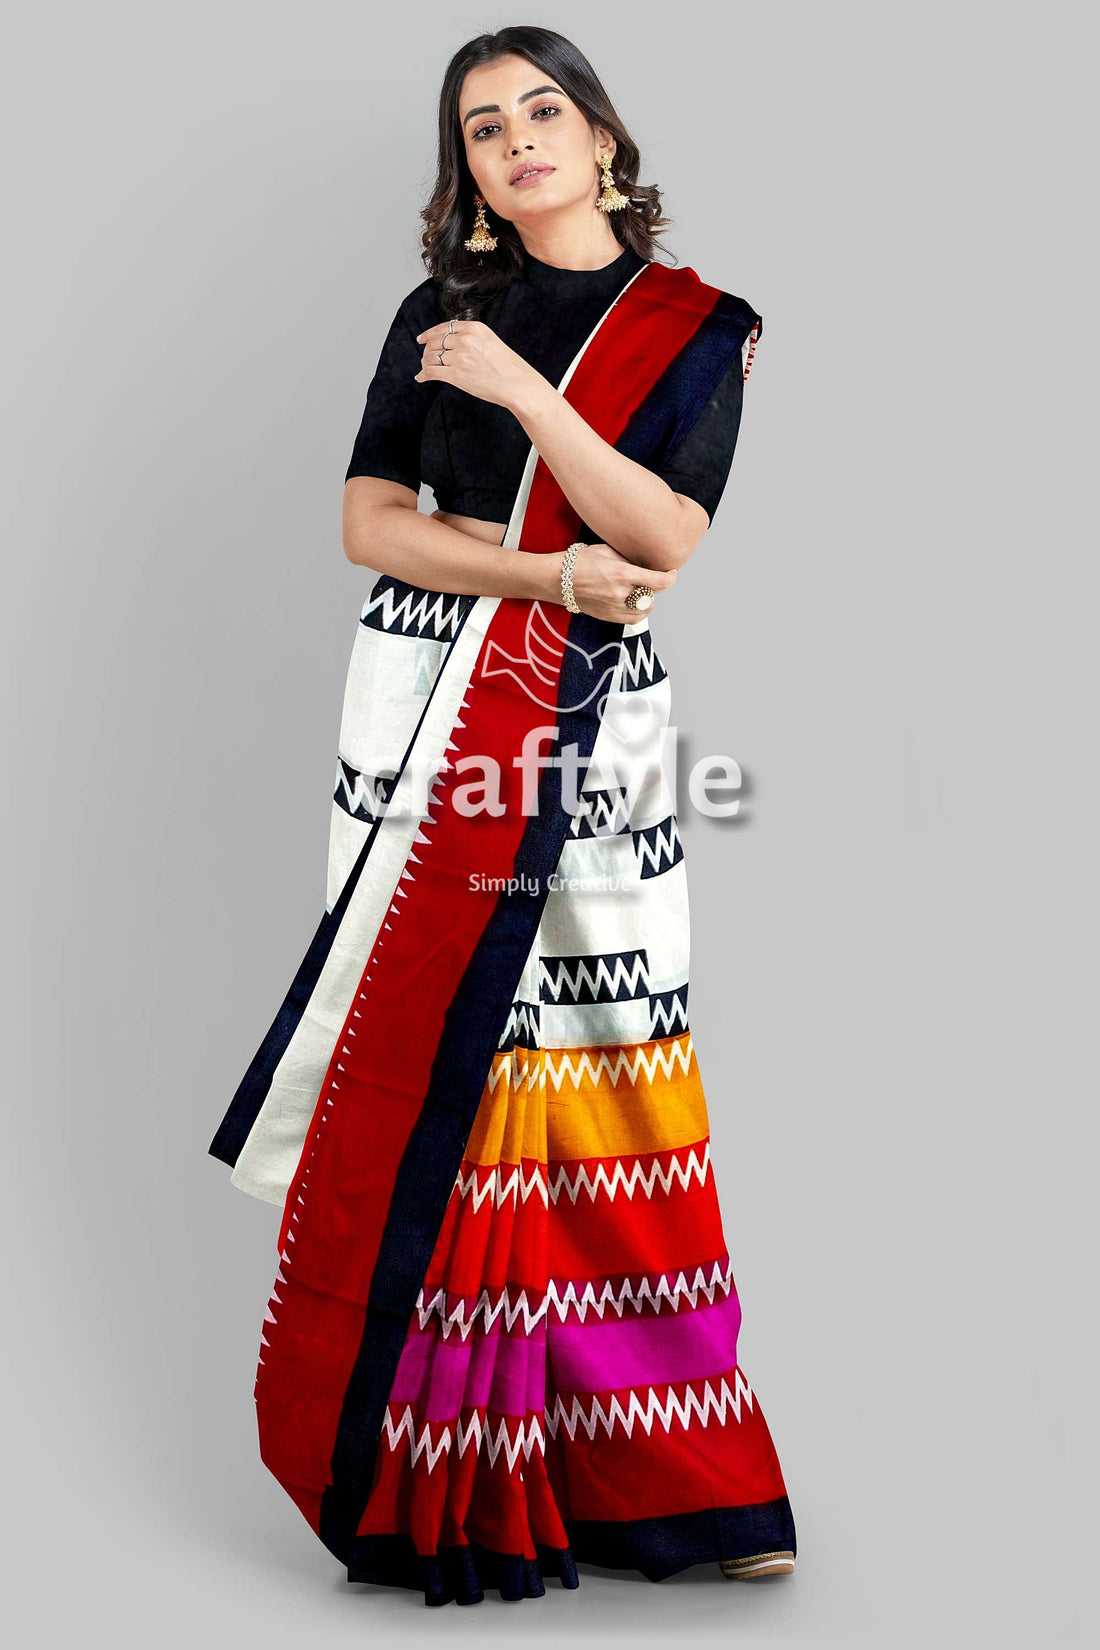 Handcrafted Zigzag Pure Mulberry Silk Saree with Vibrant Multicolor Block Print - Craftyle